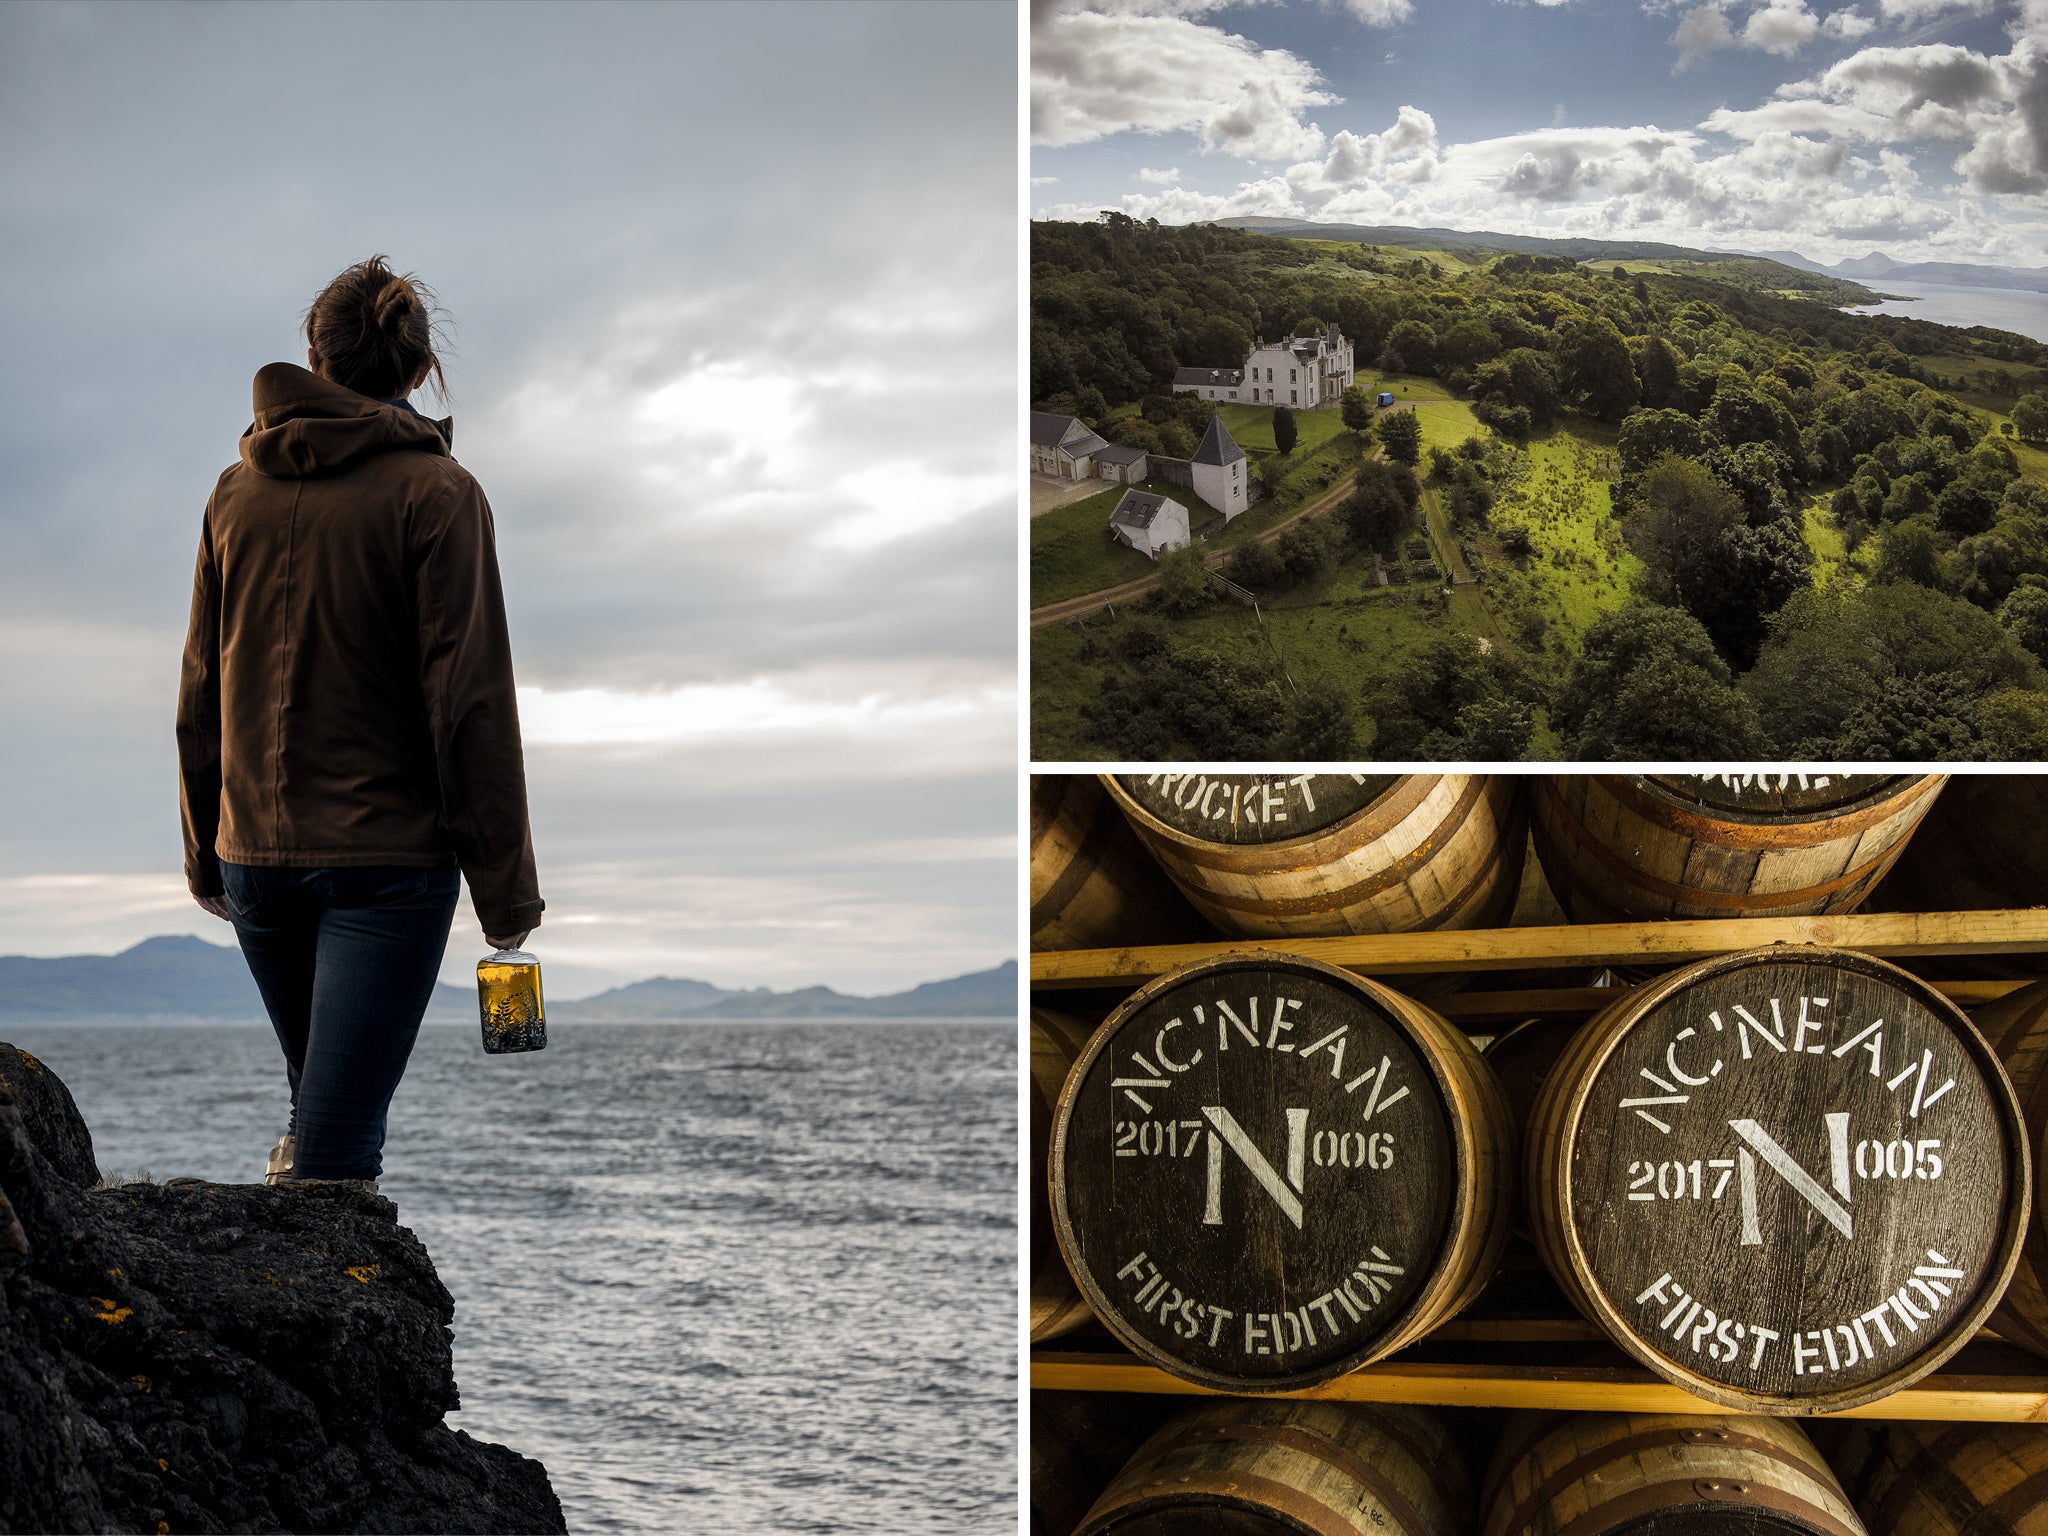 Nc’nean has a reputation for being one of the most remote distilleries in the land of whisky (AKA Scotland)